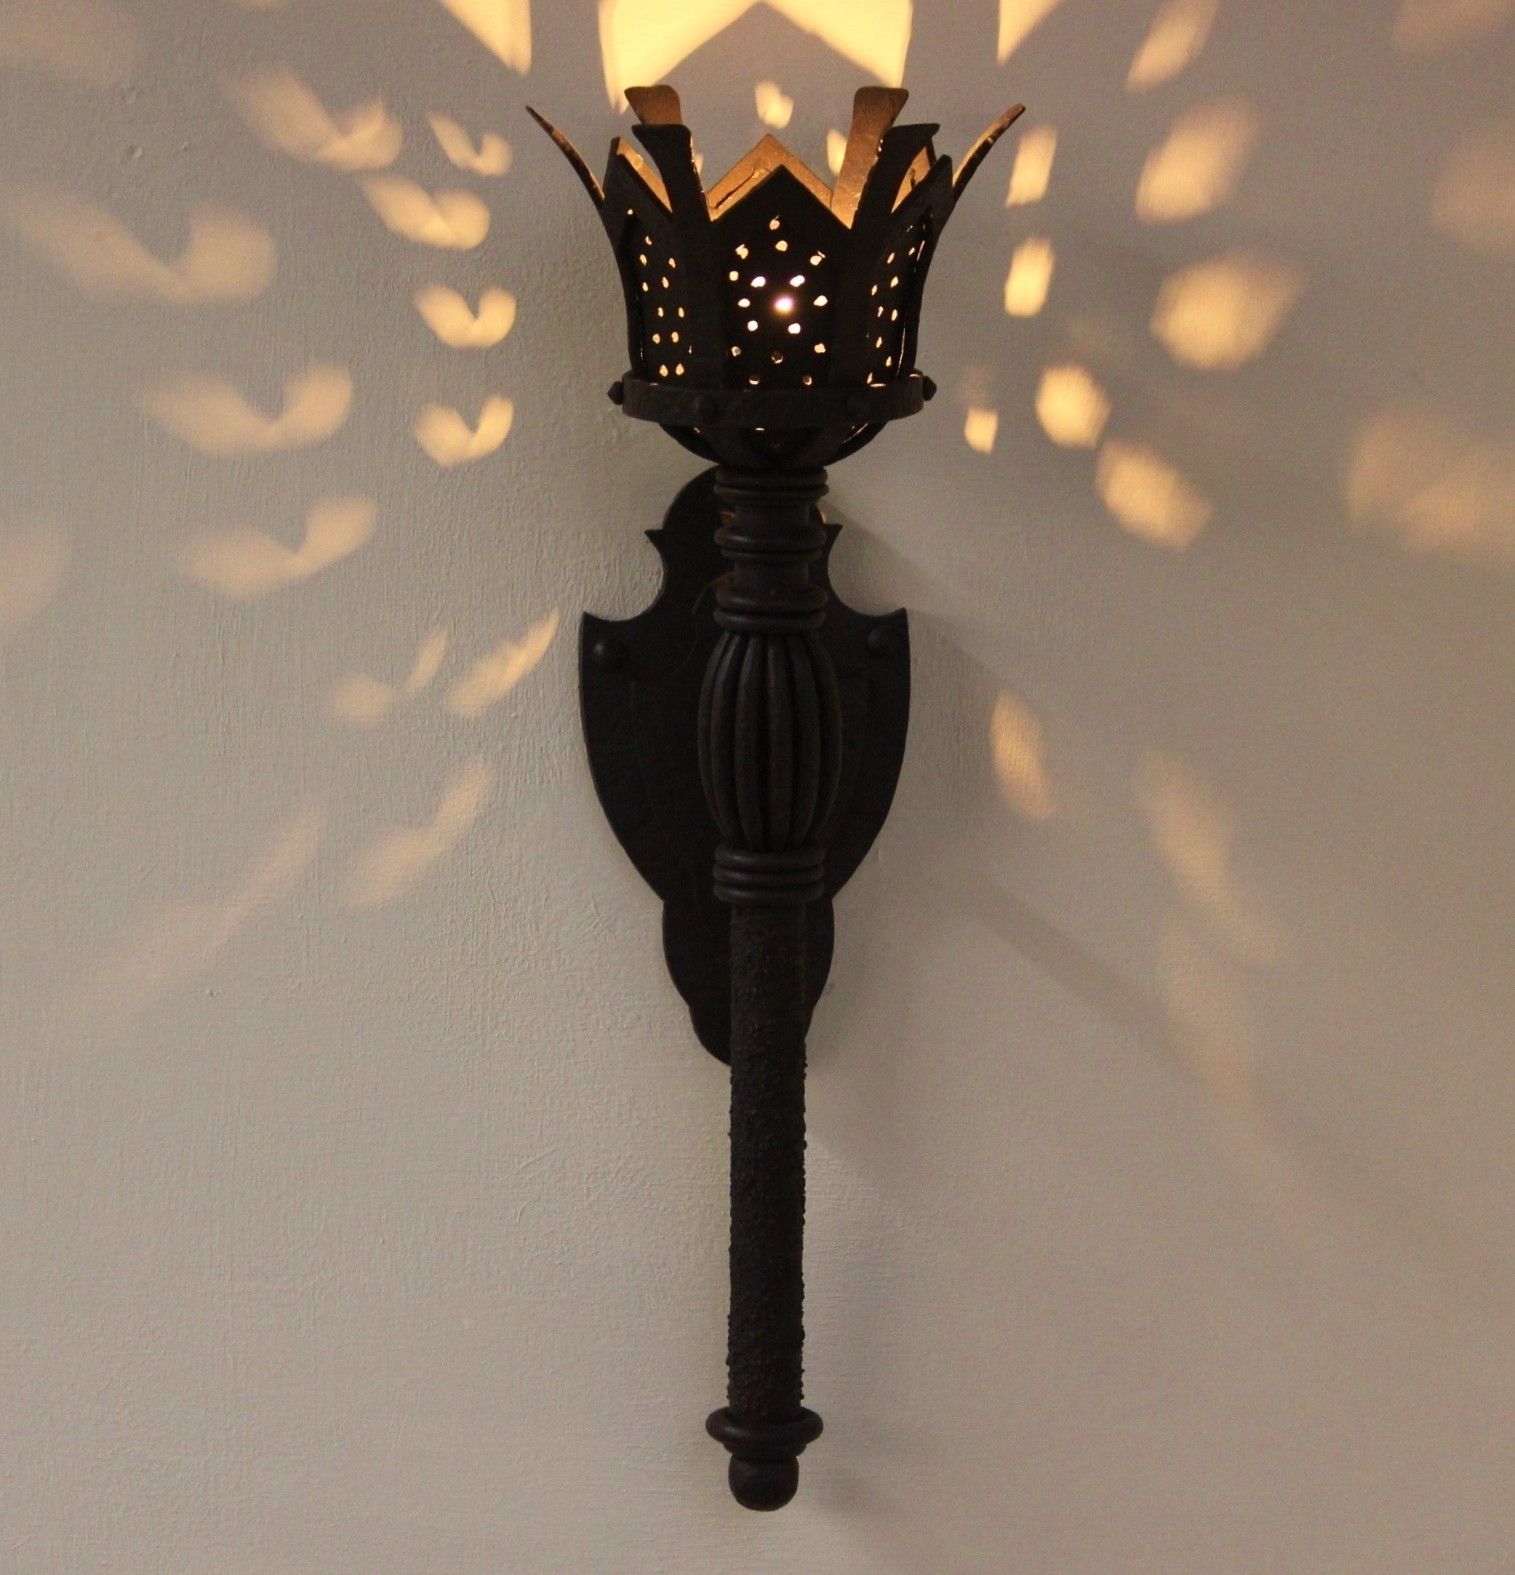 Gothic Outdoor Wall Sconce • Wall Sconces Throughout Gothic Outdoor Wall Lighting (View 6 of 15)